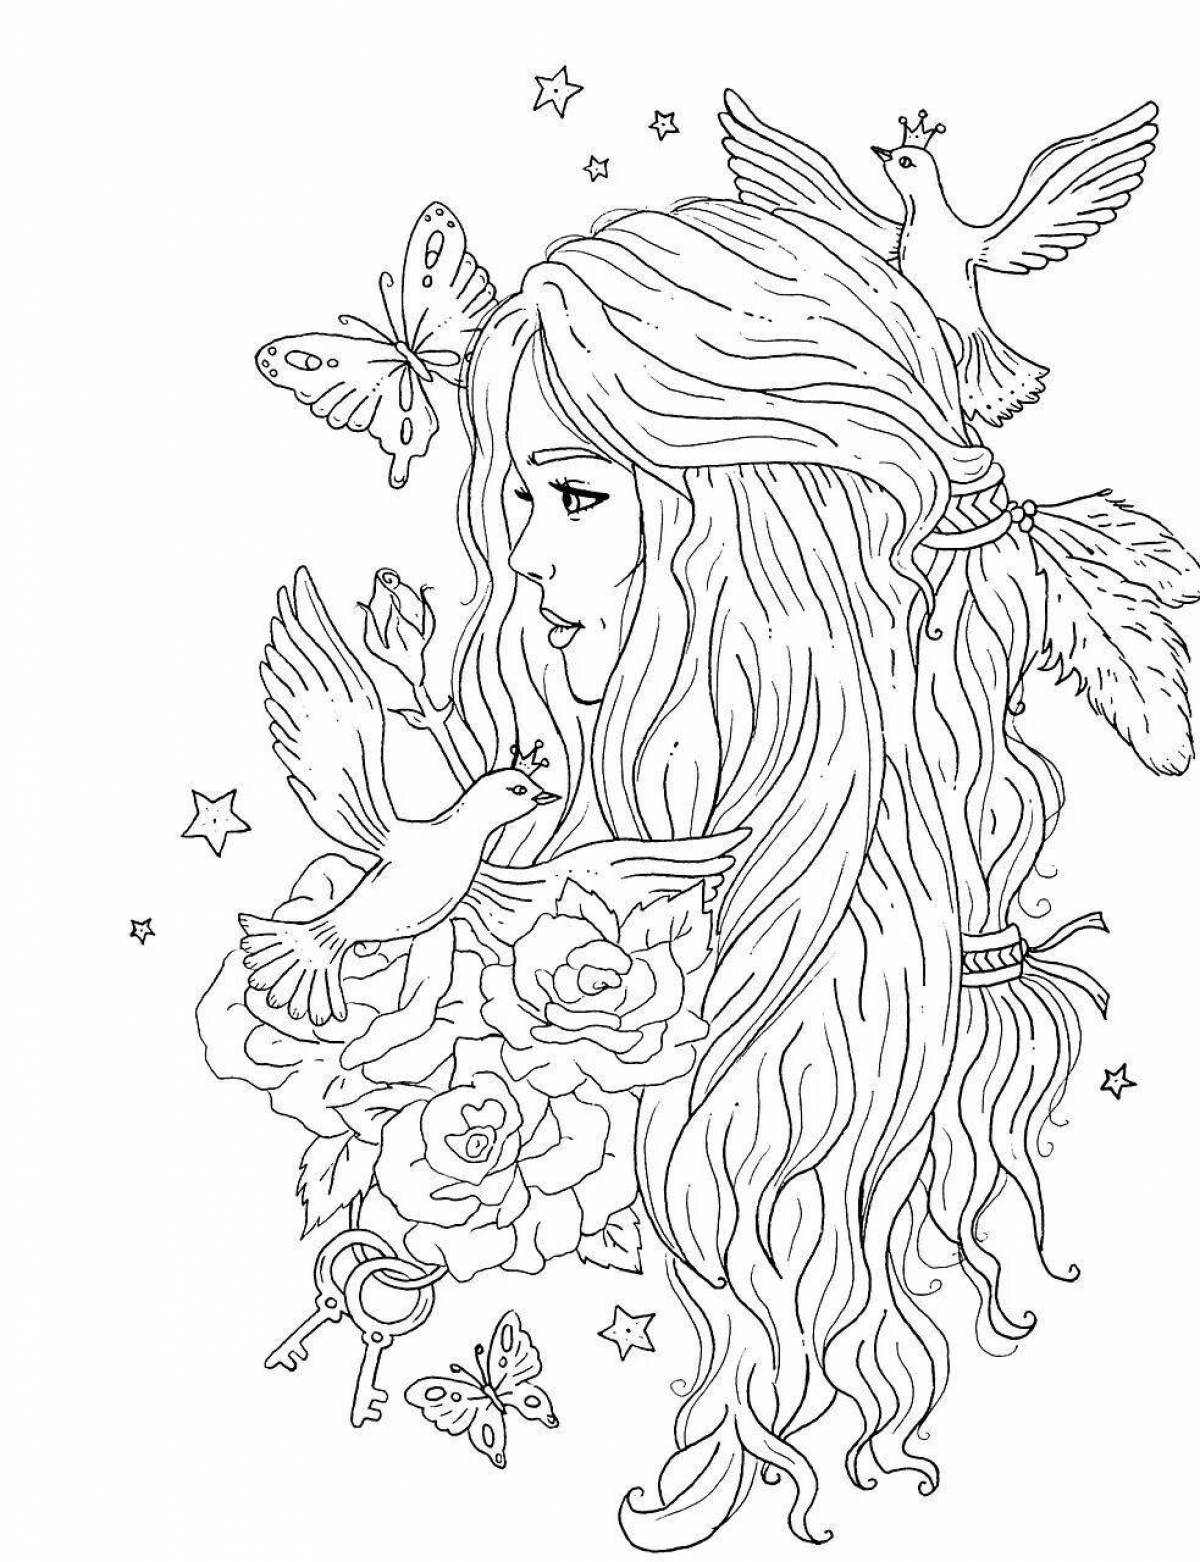 Radiant coloring page for adult girls 18 years old